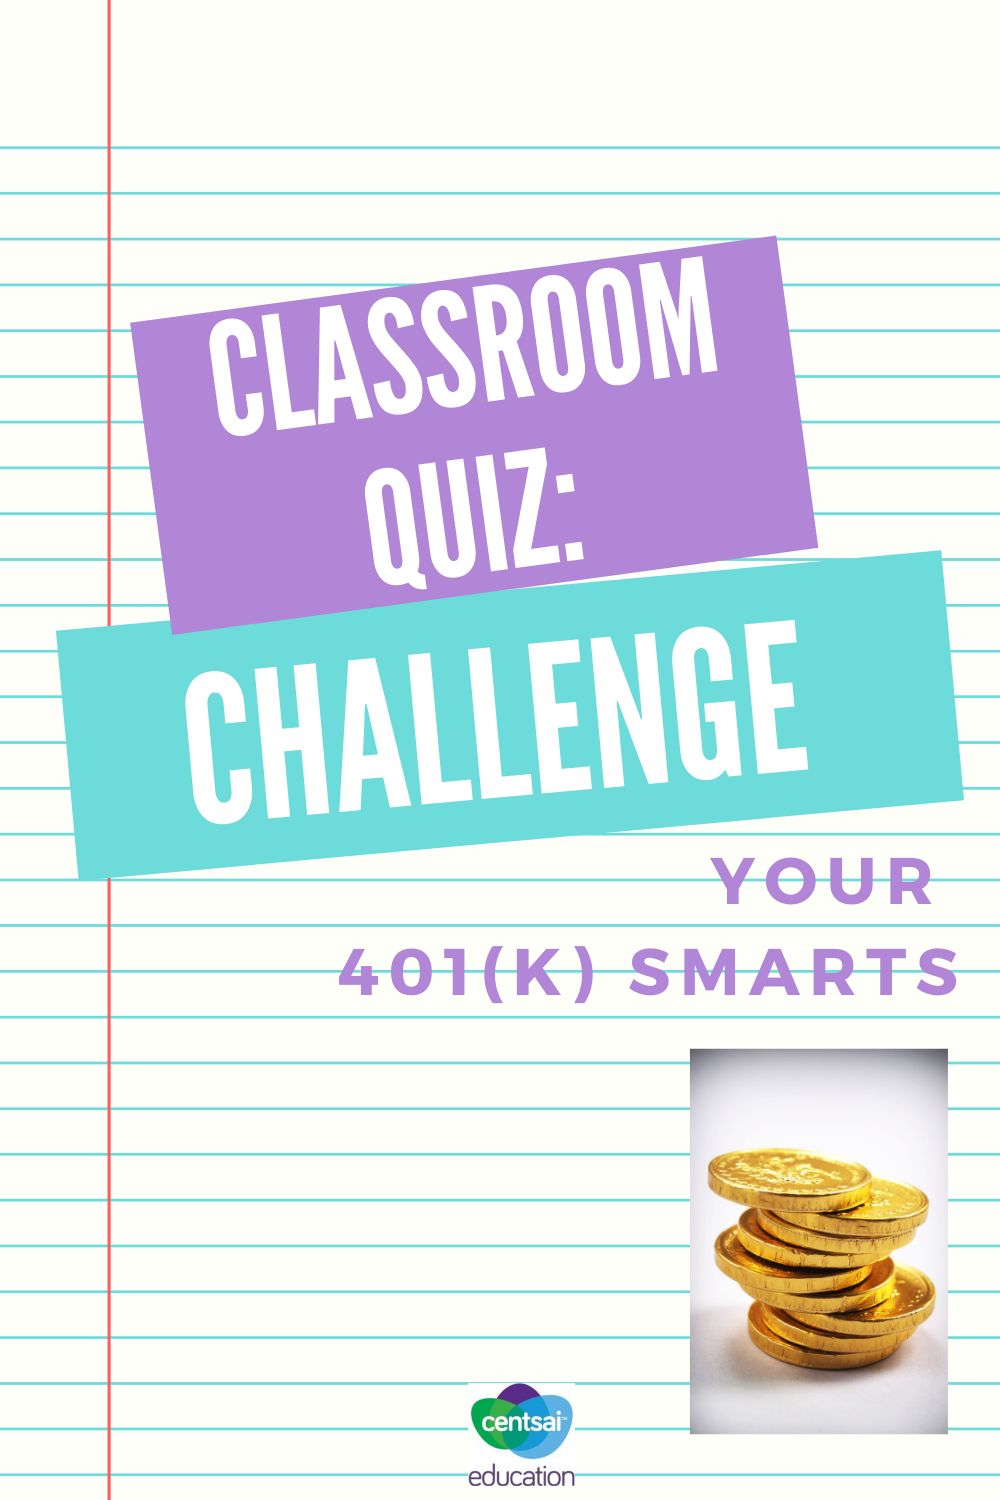 We'd wager that most students don't understand what a 401k is, but this quiz will show the proof. Are you ready to find out what your classroom knows about this important part of retirement planning? #retirementidea #retirementplanningtips #daveramseyretirement #savingforretirementideas #CentSaiEducation